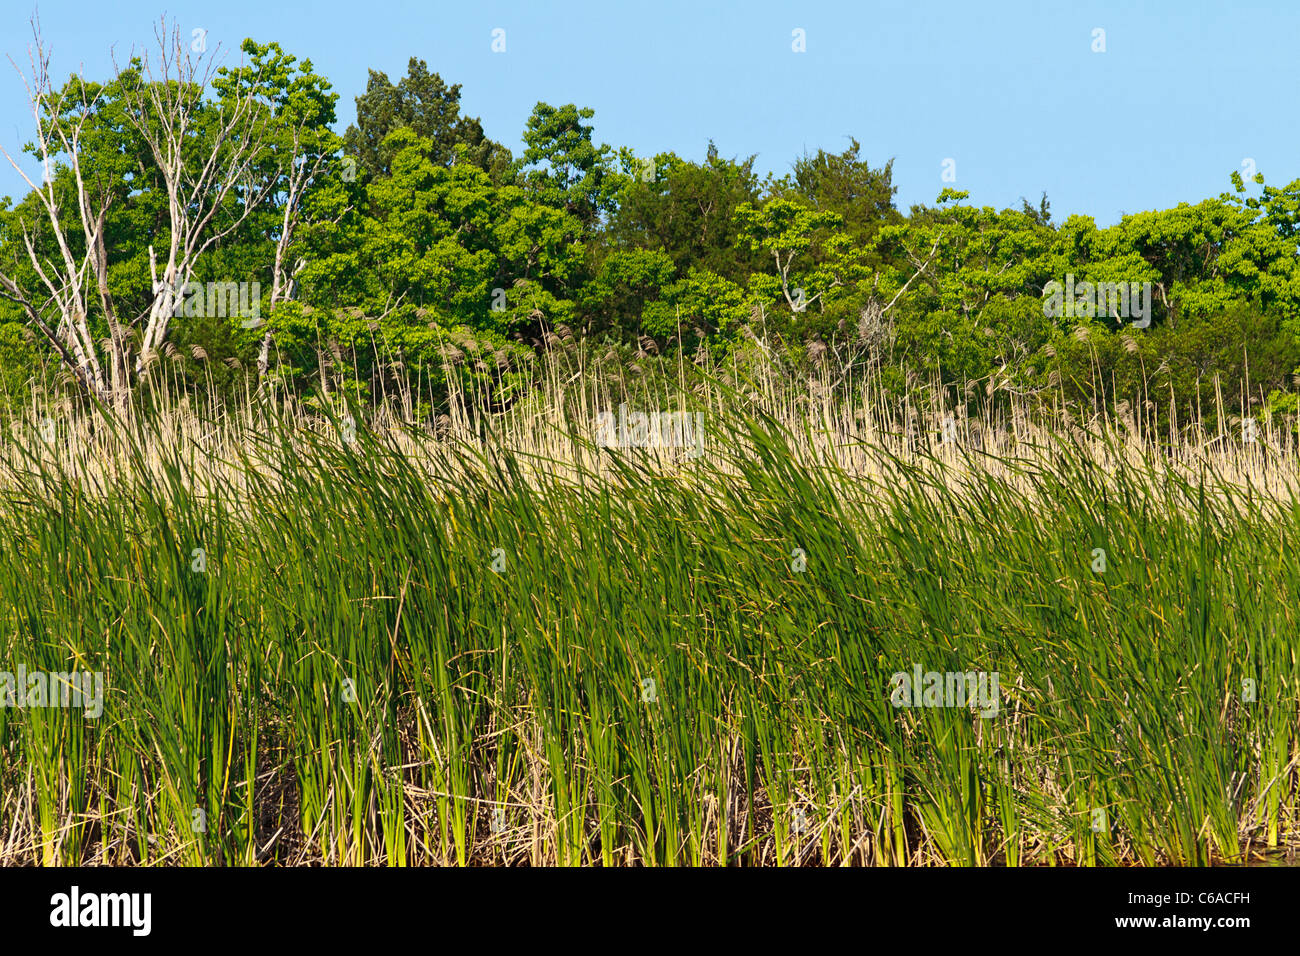 Sea oats and sawgrass with hard wood trees along the Apalachicola River in the town of Apalachicola along the Florida Panhandle. Stock Photo